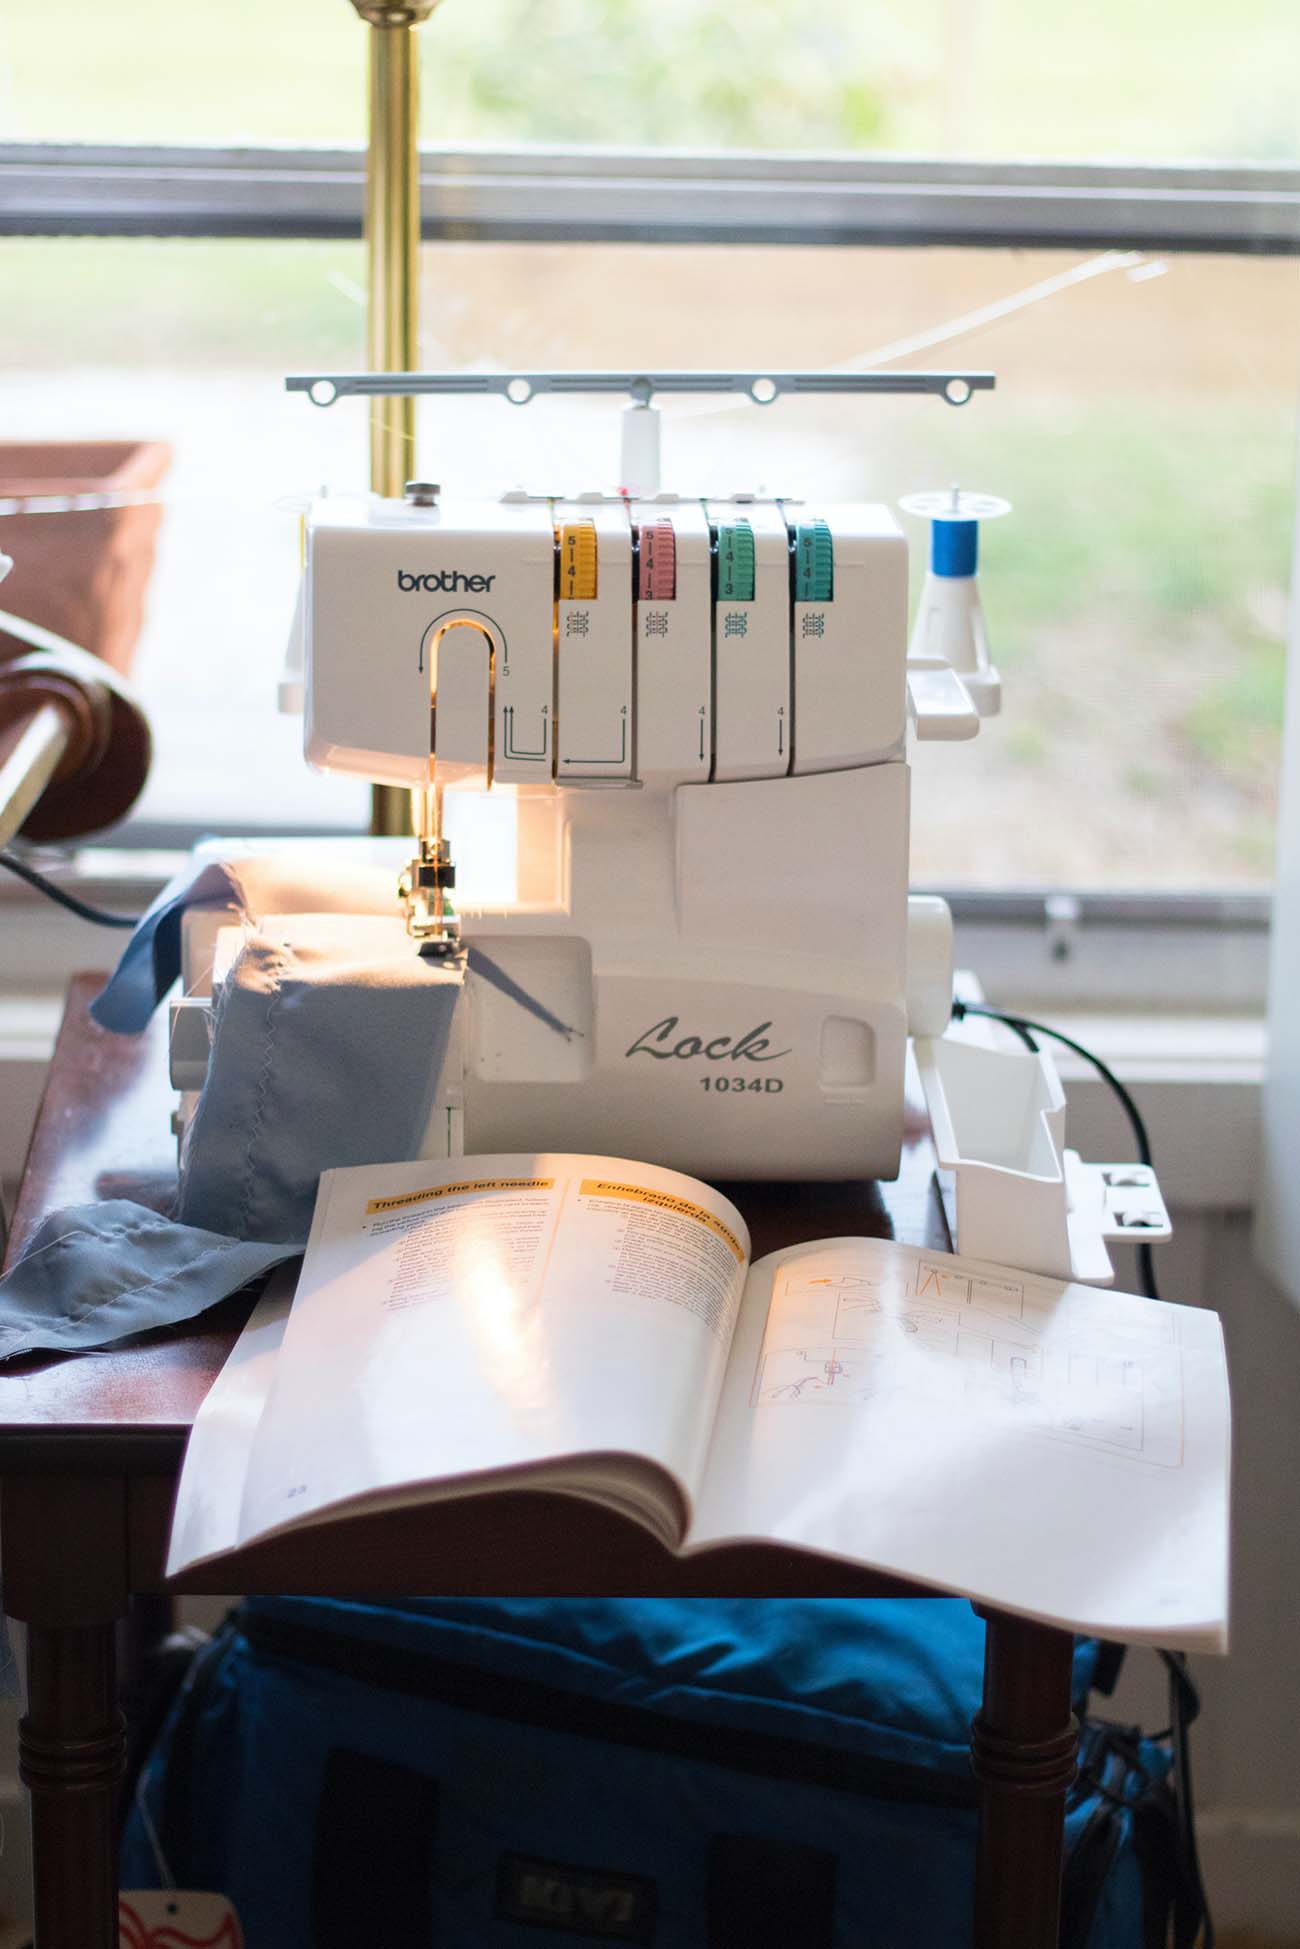 Serger vs Sewing Machine: Which is Better for Clothing?